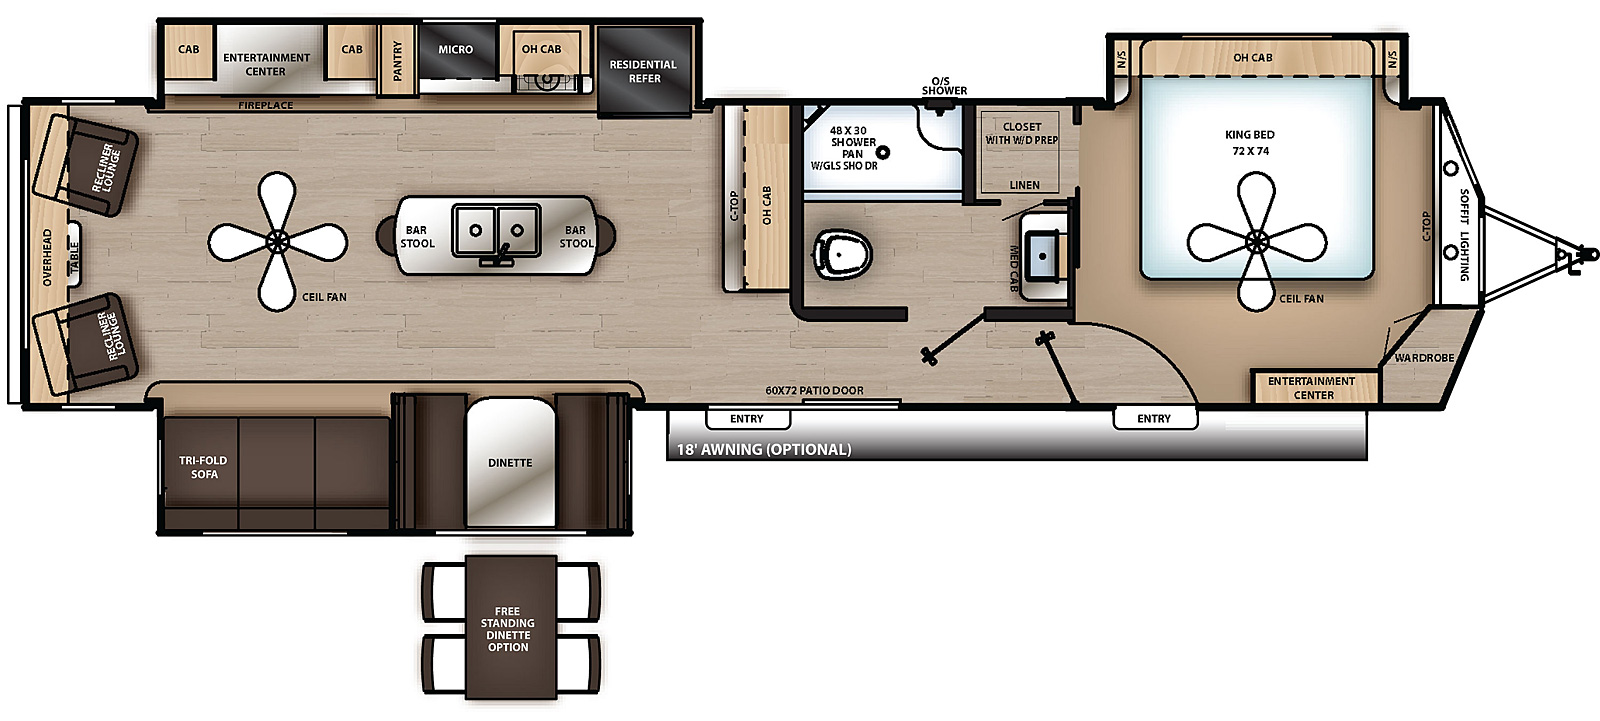 The 39RLTS has three slide outs with two on the off-door side and one on the door side and two entry doors on the door side. Interior layout from front to back: front bedroom with off-door side slide out containing side facing king bed, overhead cabinet, entertainment center, and wardrobe; off door side bathroom; door side slide out containing dinette and sofa; off door side slide out containing refrigerator, cook top stove, overhead cabinet, microwave cabinet, pantry, and entertainment center with fireplace; free standing island with double basin sink and bar stools; and recliner lounges.